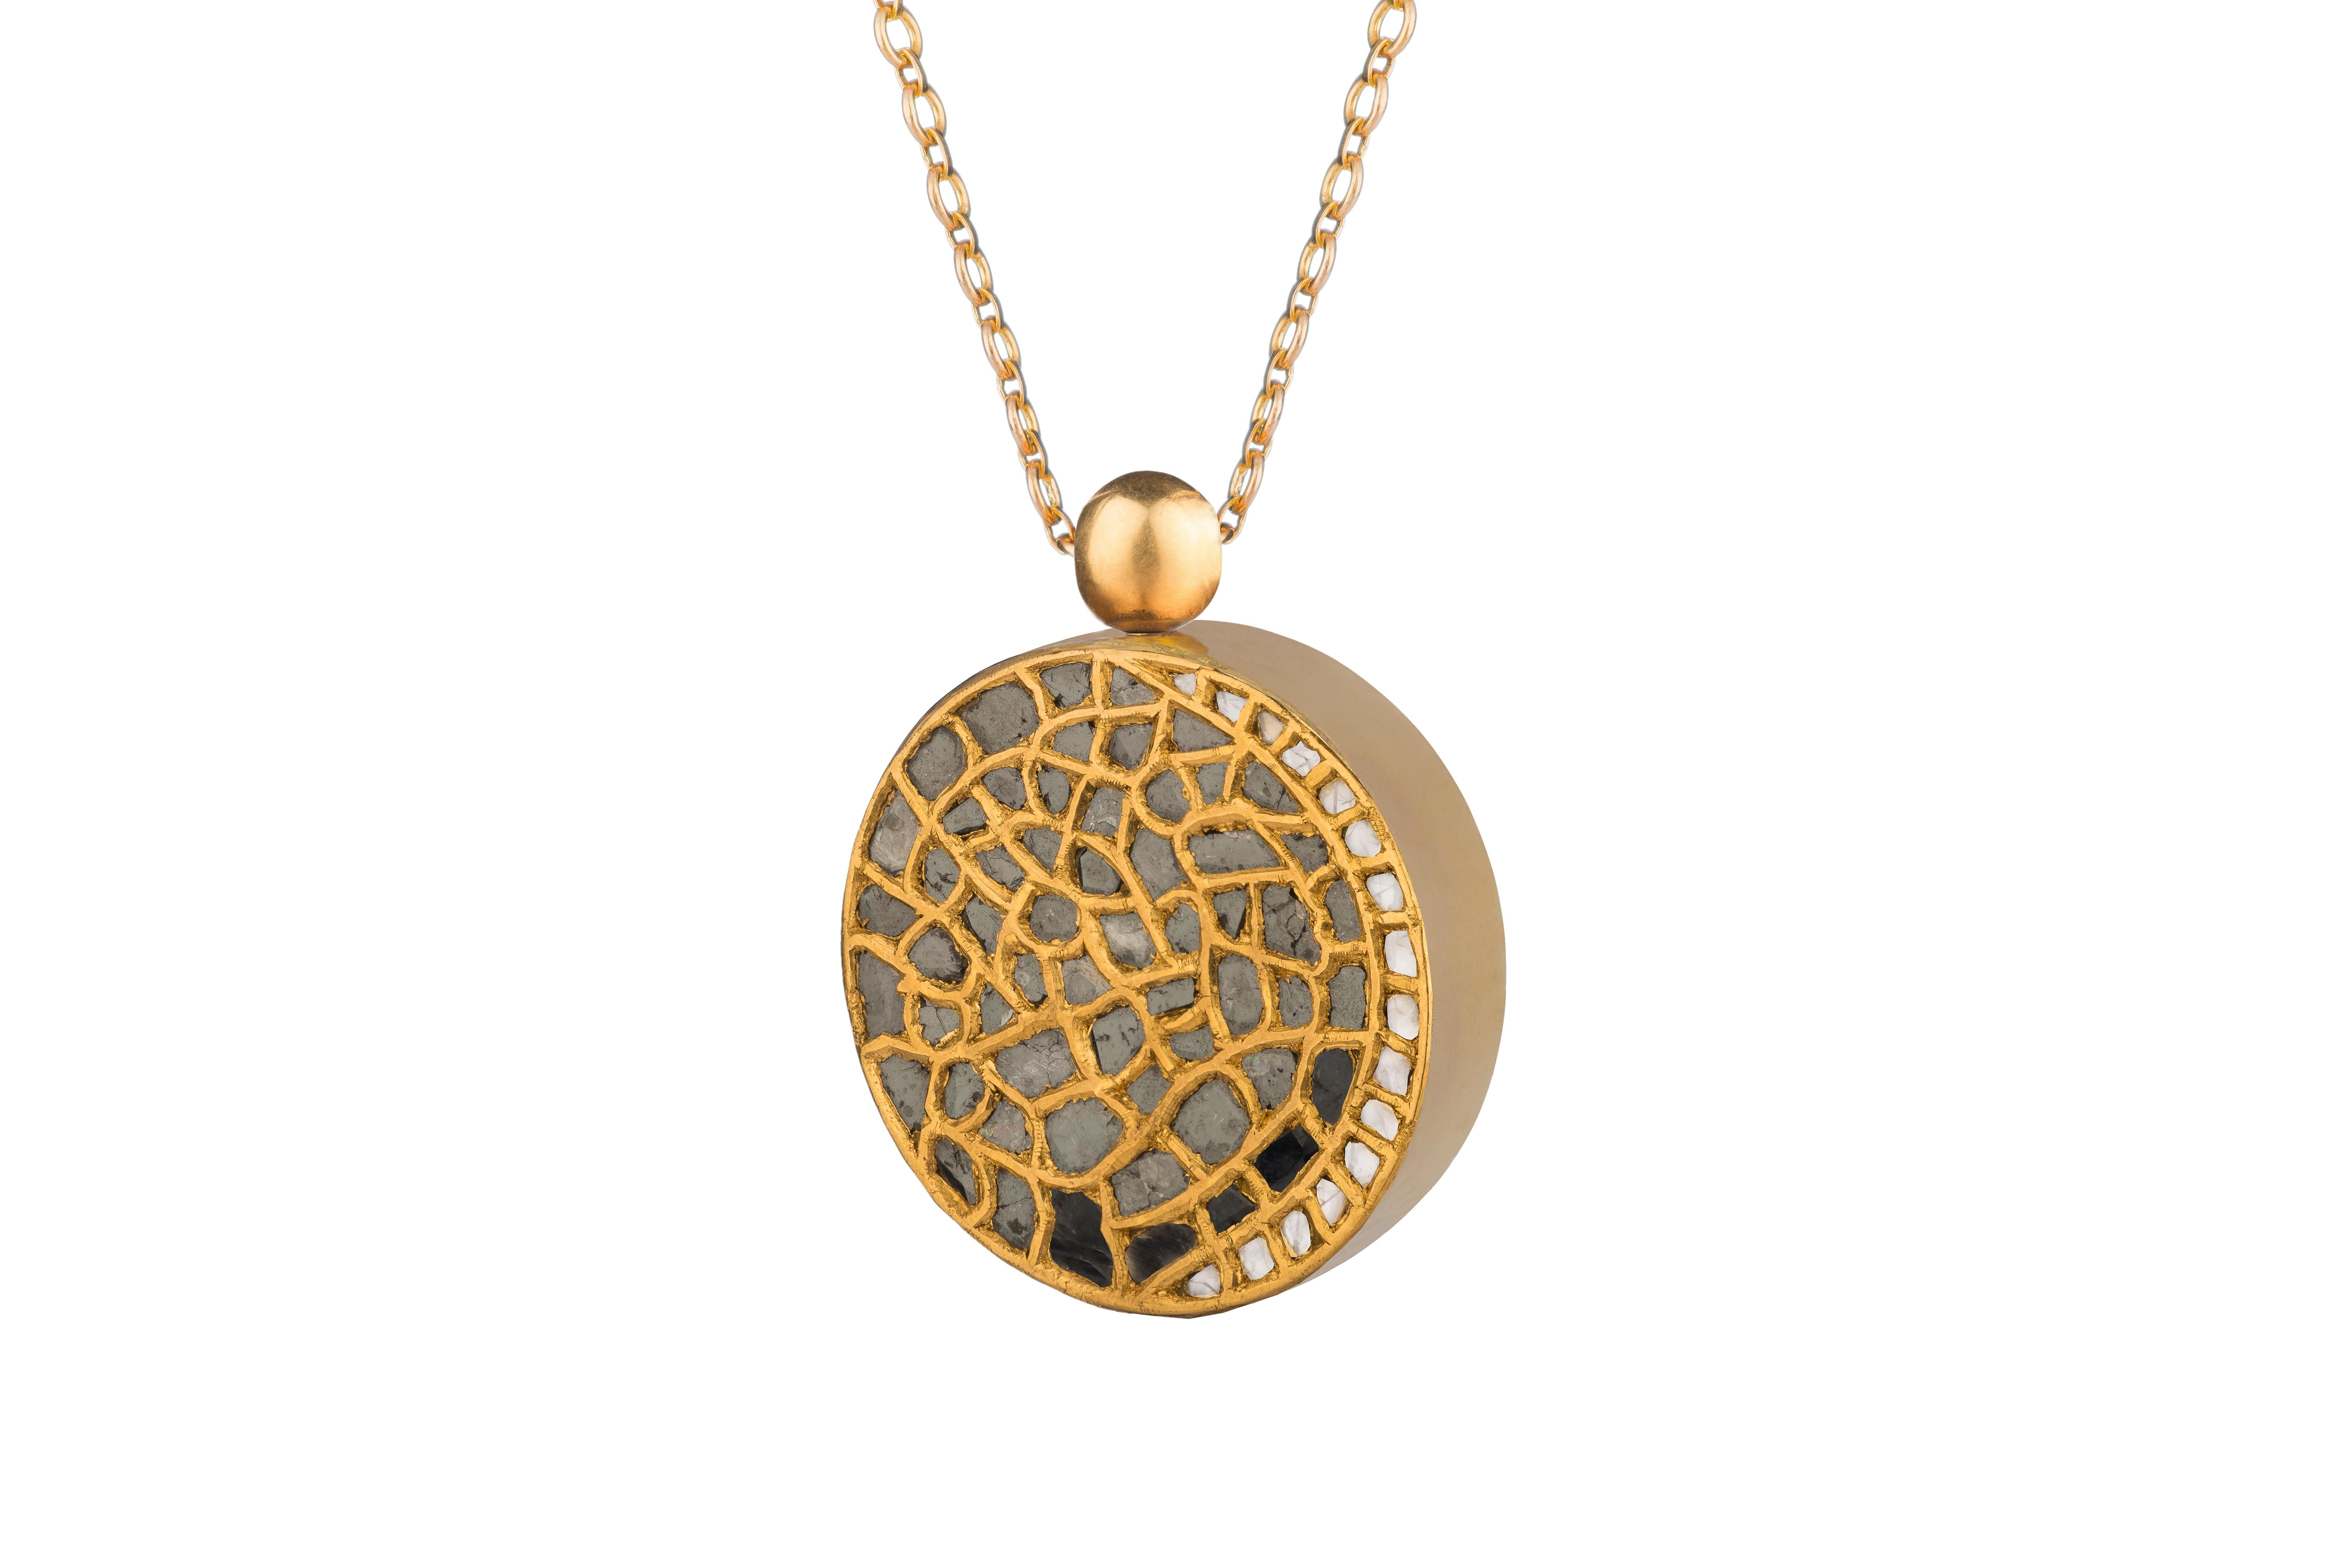 THE THIN EDGE OF THE WEDGE by OUROBOROS

Polki diamonds Kundan set in 24kt gold and white and black agate set in 18kt gold on a handmade 18kt gold chain, with an 18kt gold Ouroboros lasered ball to finish the back.

If this item is out of stock.